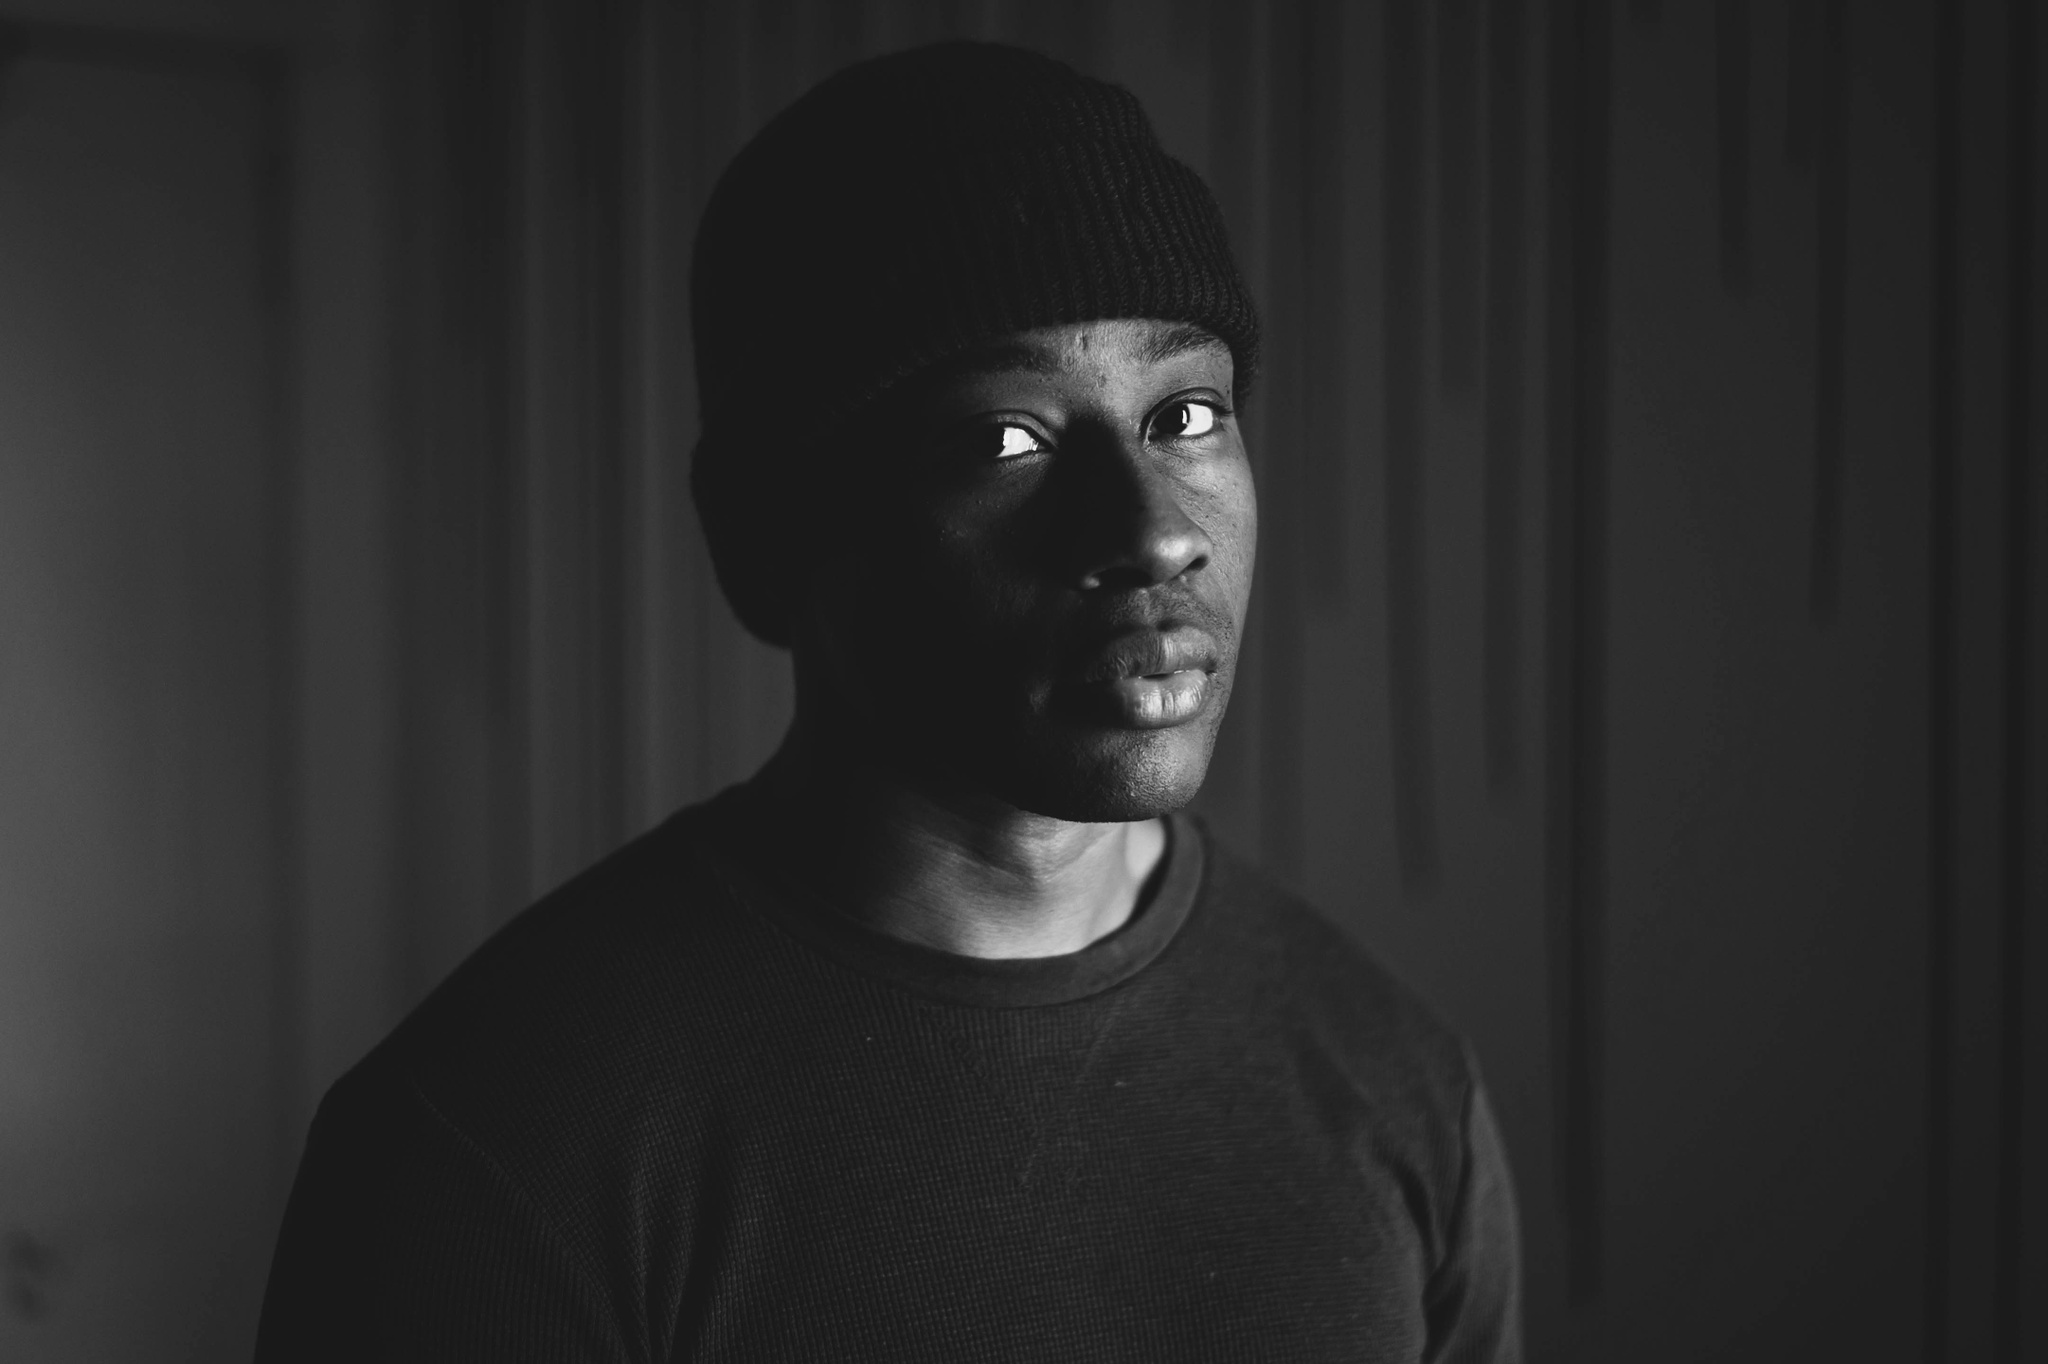 A black-and-white photo of Elliott Ashby, who wears a dark crewneck shirt and beanie. Light falls on the left side of Ashby's face, leaving the right side in dramatic shadow. 